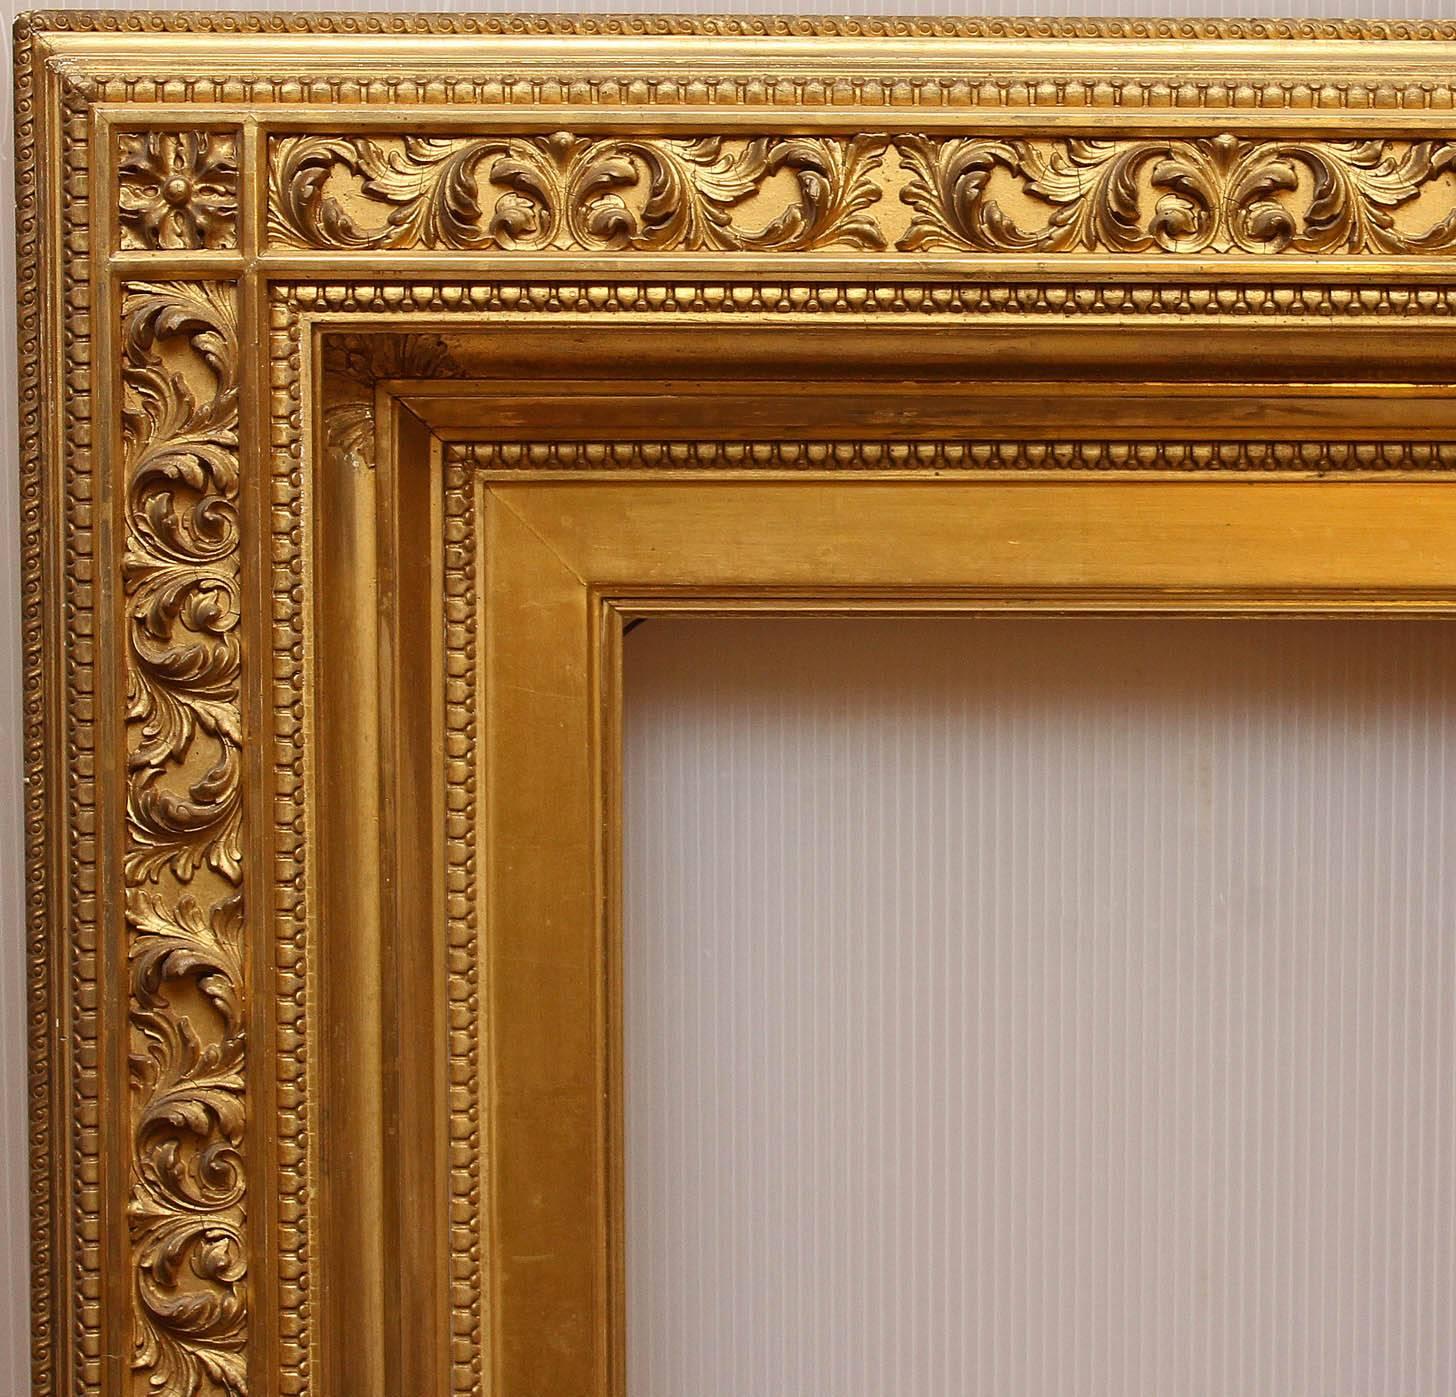 An exceptional antique American  impressionist frame by preeminent gilders W.K O'Brien and Bros.  O'Brien Brothers created frames for some of the most important artists of the time.  Examples of O'Brien's frames are in the collection of The